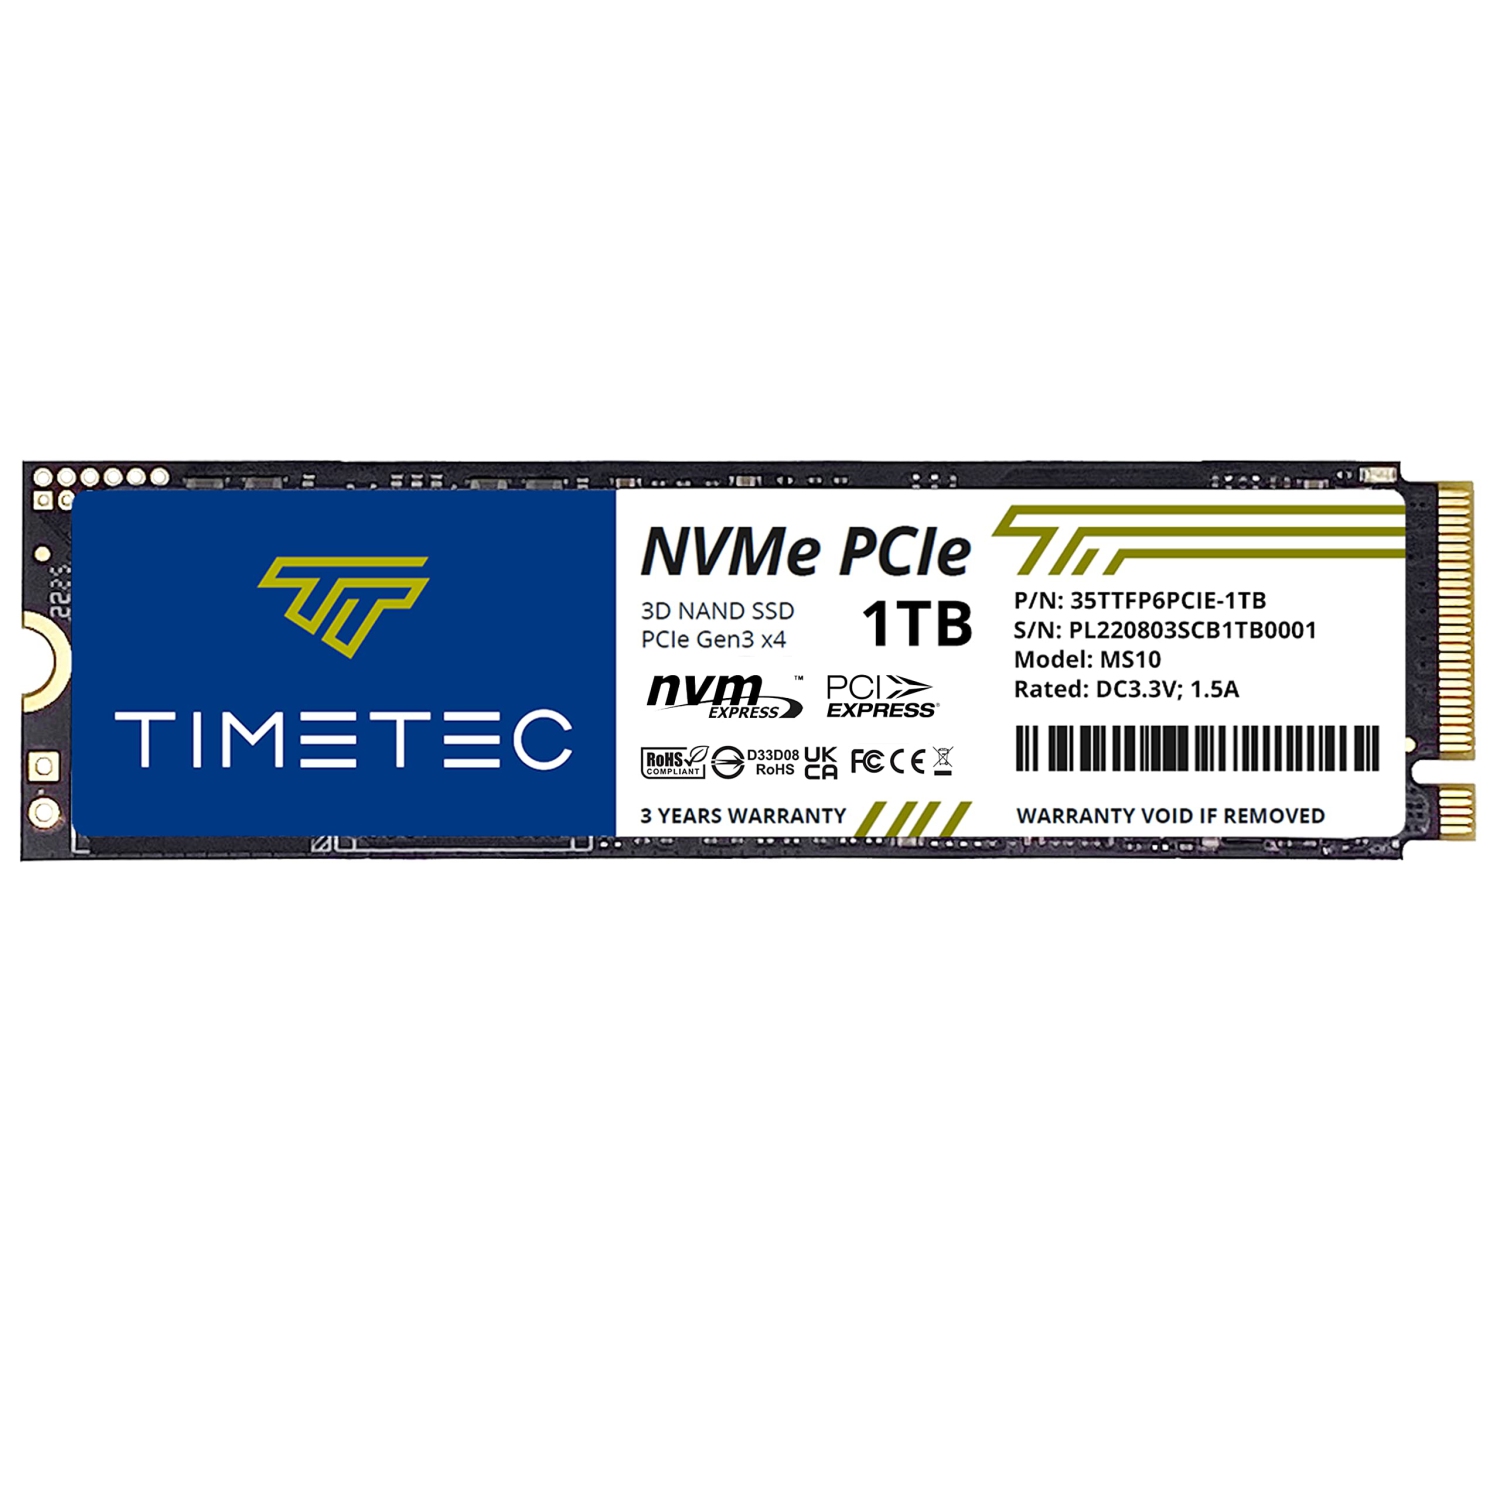 Timetec 1TB SSD NVMe PCIe Gen3x4 8Gb/s M.2 2280 3D NAND TLC 600TBW High Performance SLC Cache Read/Write Speed Up to 2,000/1,600 MB/s Internal Solid State Drive for PC (1TB)